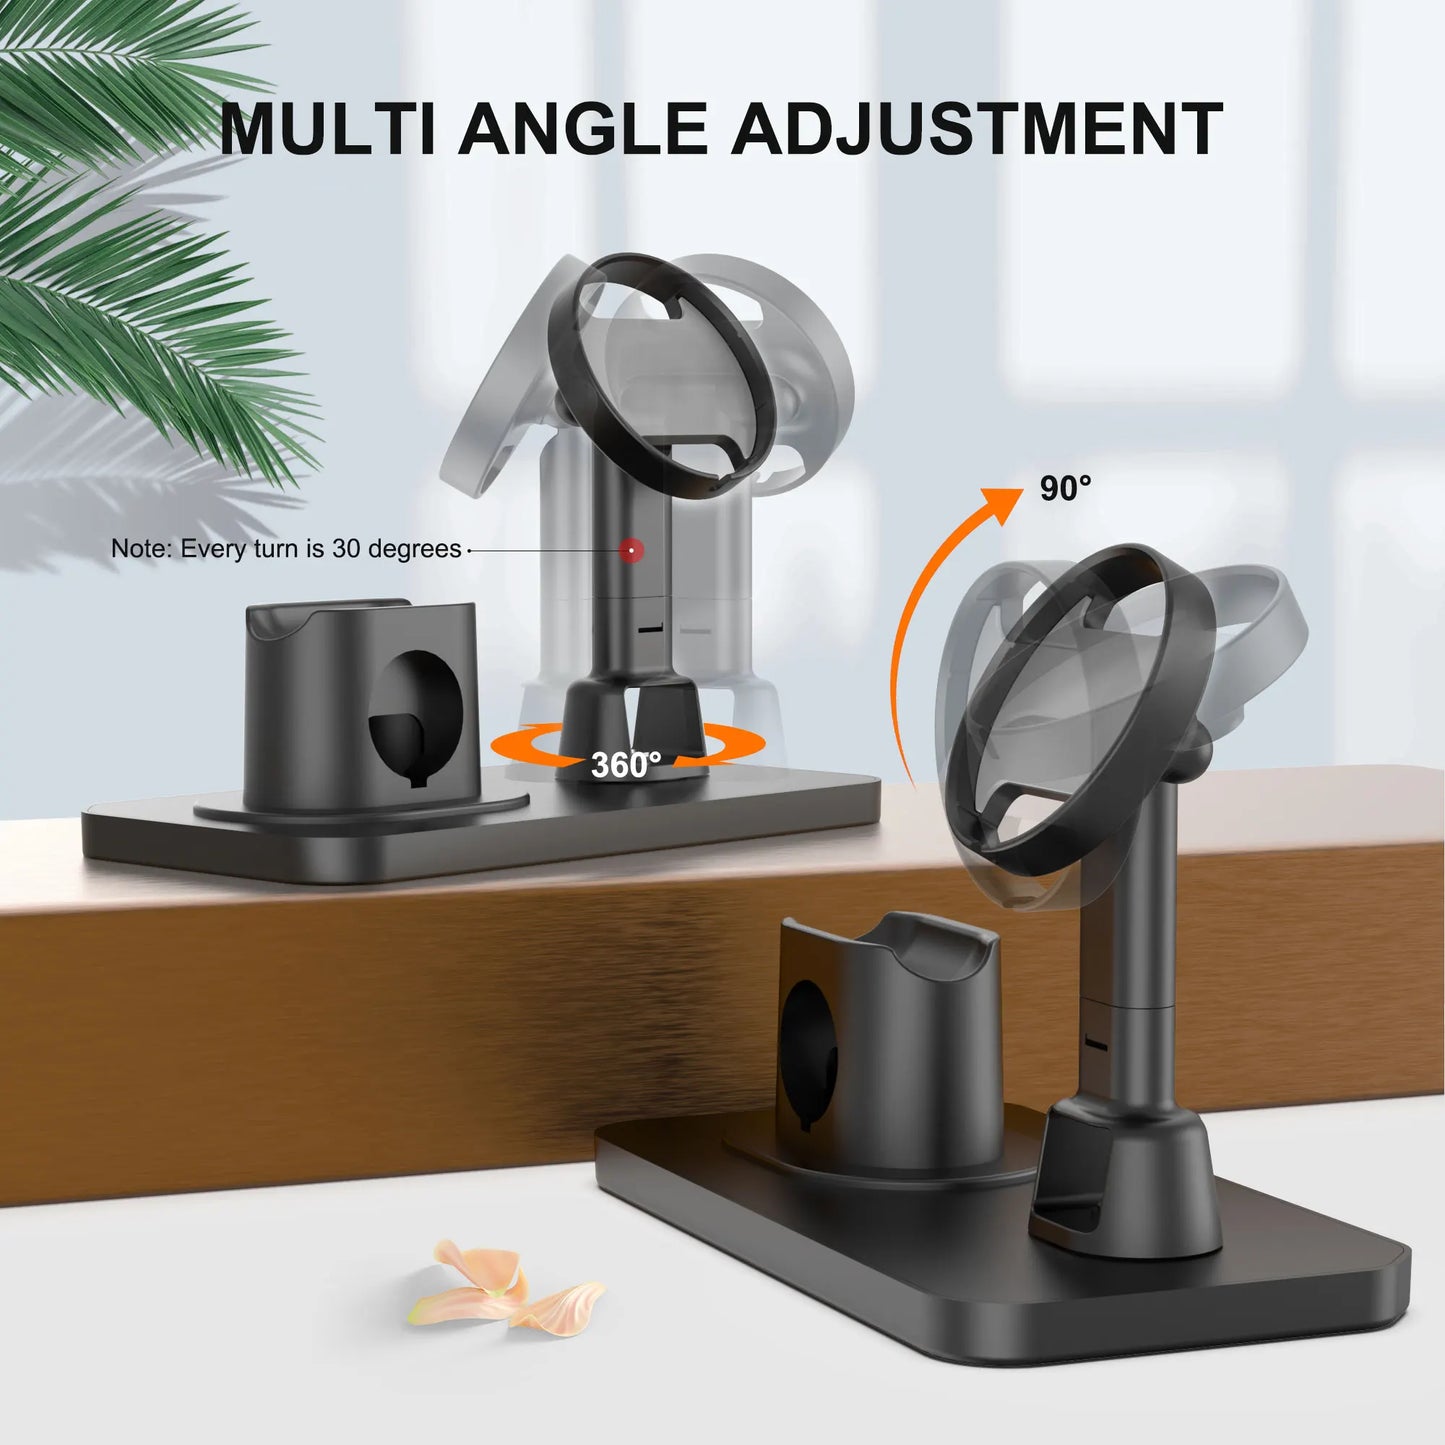 3 In 1 Wireless Desktop Charging Stand Dock Station Suitable For IPhone 12 Series Desktop Three In One Stand Airpods Pro1/2/3/4